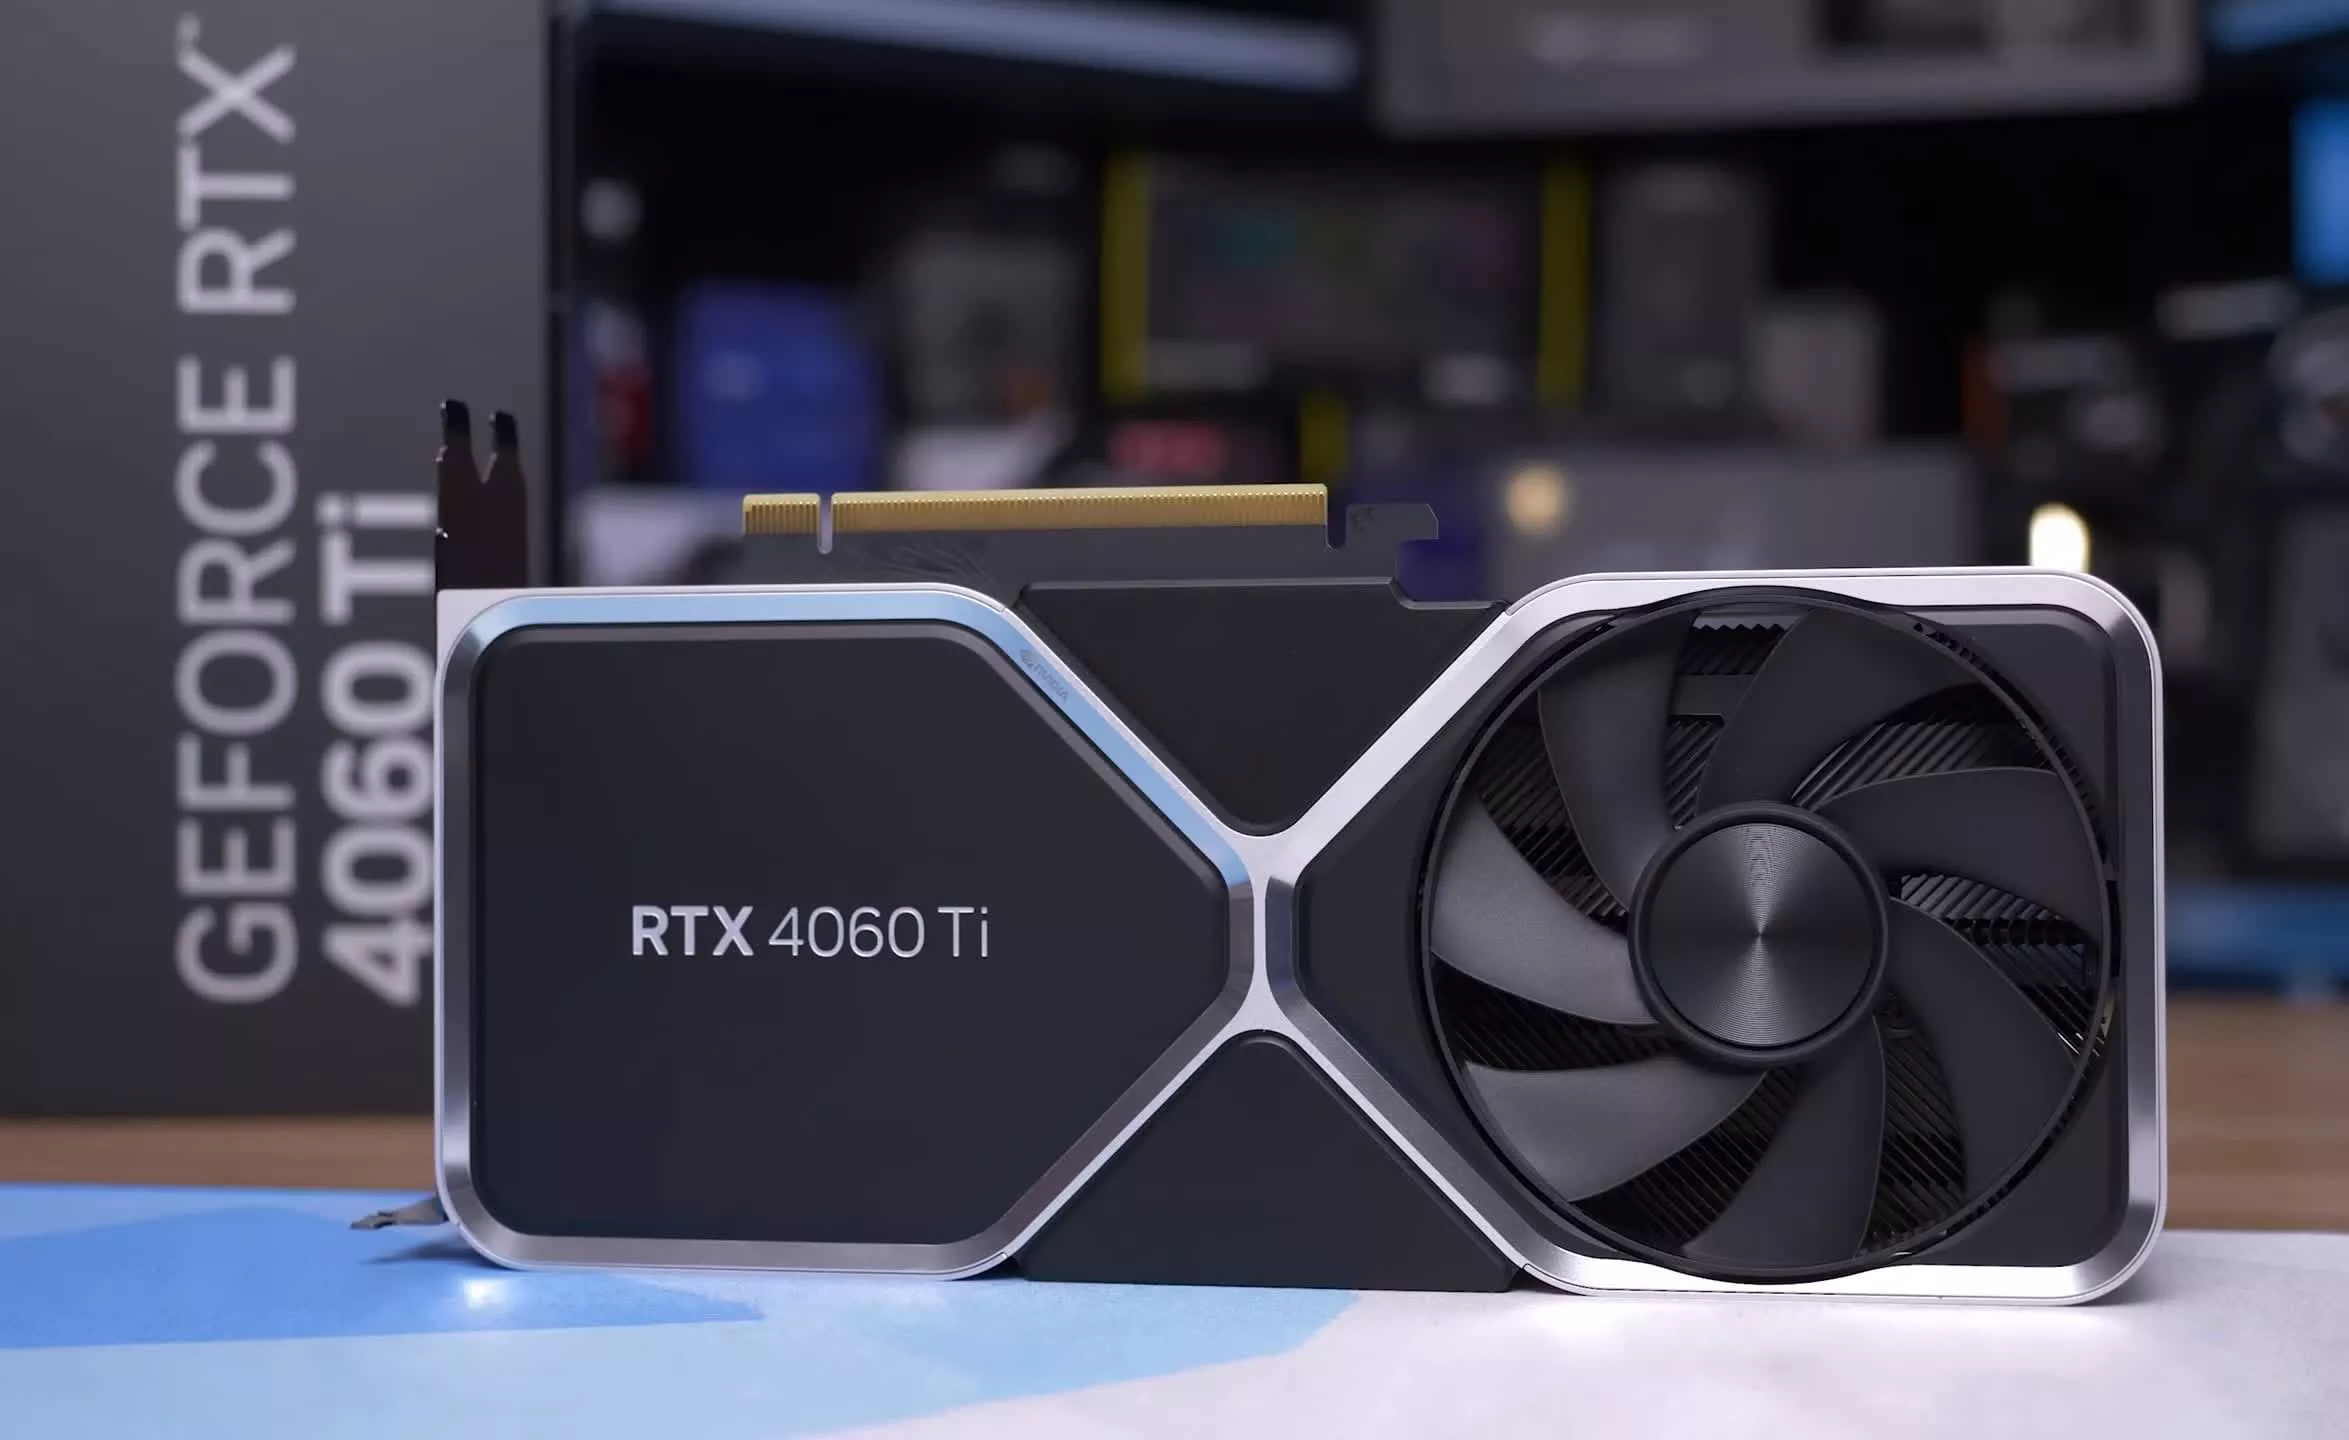 Nvidia GeForce RTX 4060 Ti 8GB Reviews, Pros and Cons